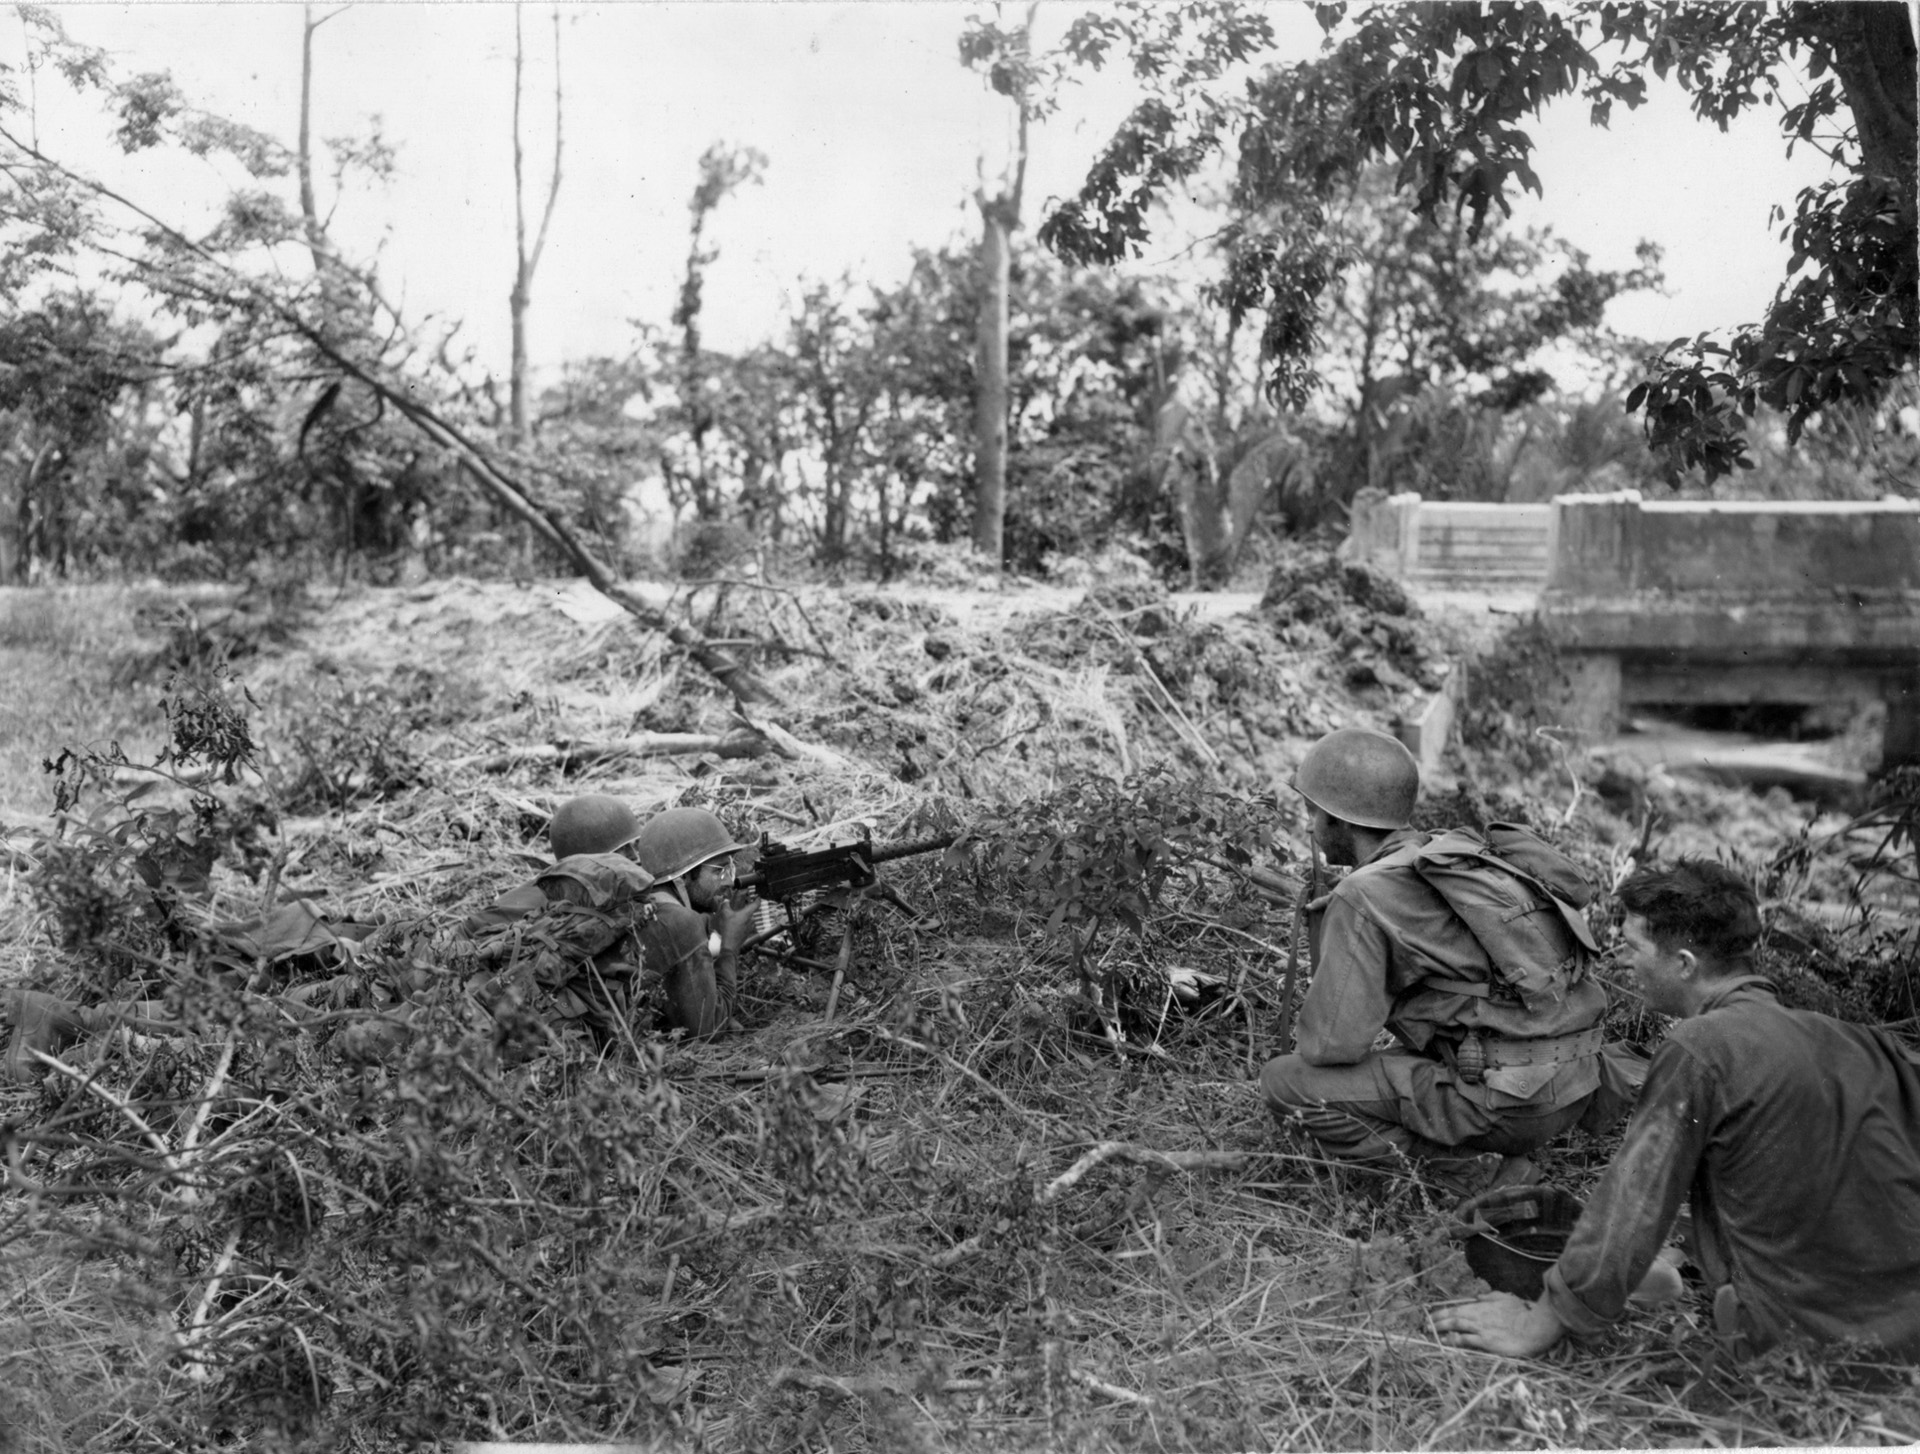 A pair of American soldiers occupy a foxhole with a .30-caliber machine gun at the ready while other members of their squad approach. The sluggish advance against the Japanese on the Bataan Peninsula took its toll on the U.S. troops, while the enemy often fought to the death.